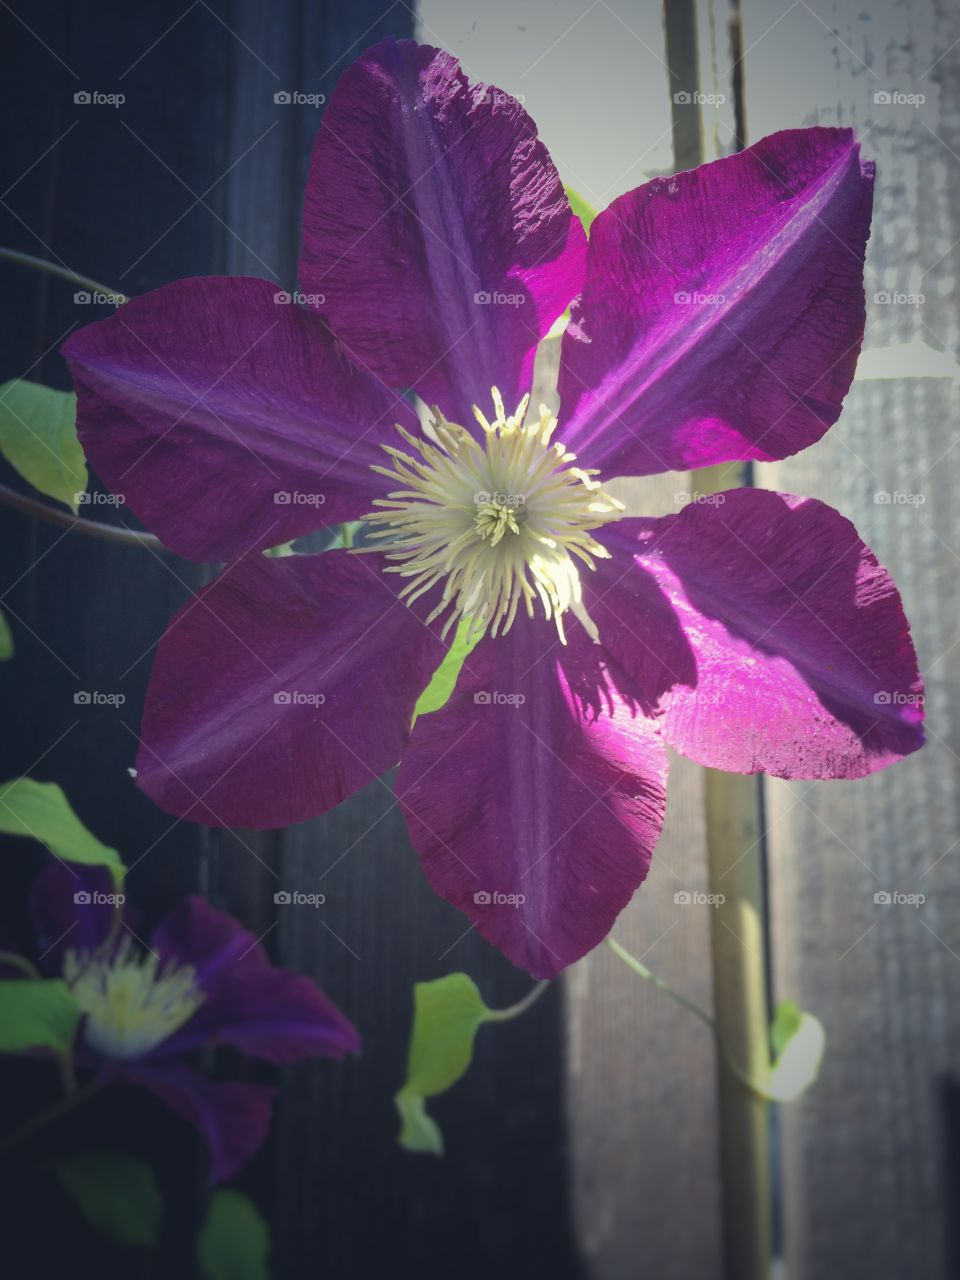 Clematis and it's beautiful flowers 